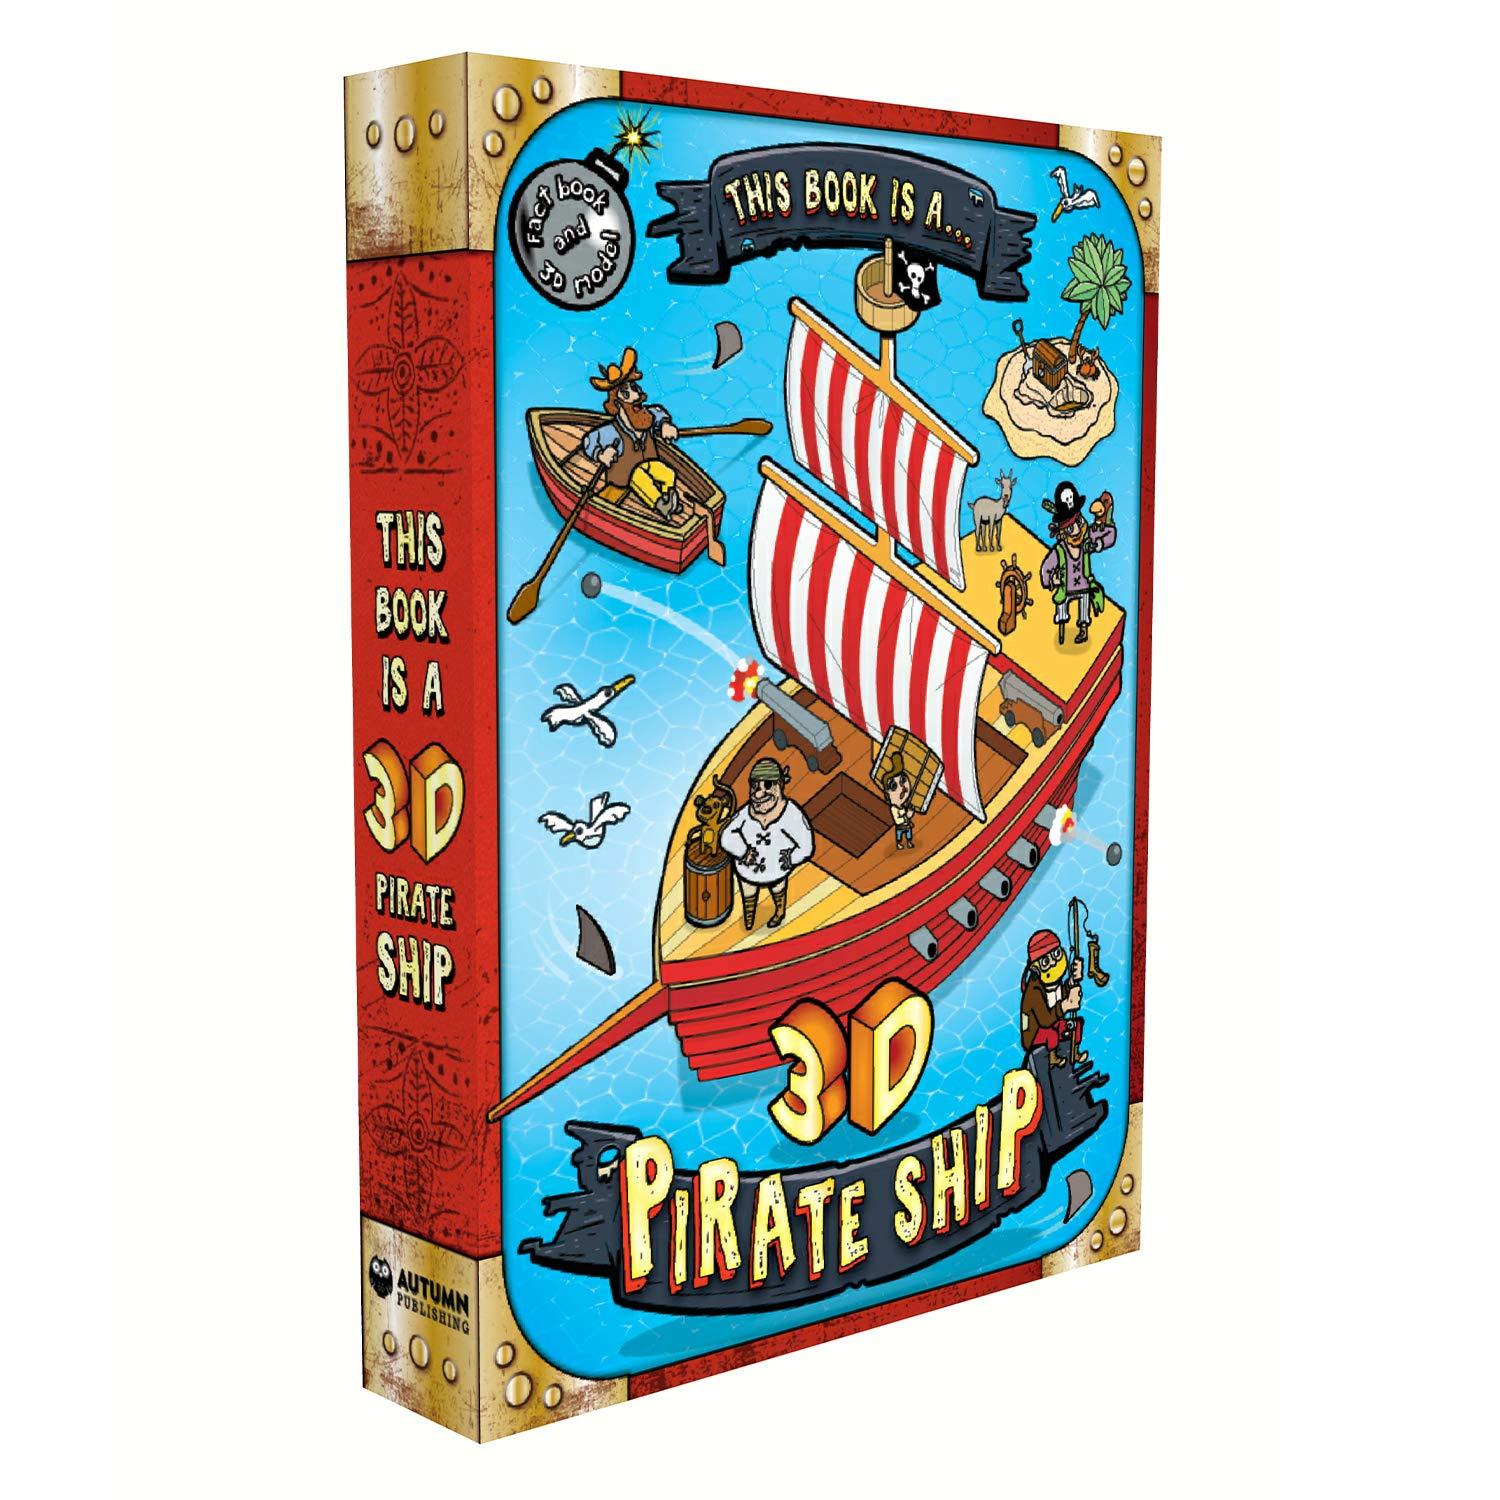 This Book Is A... 3D Pirate Ship